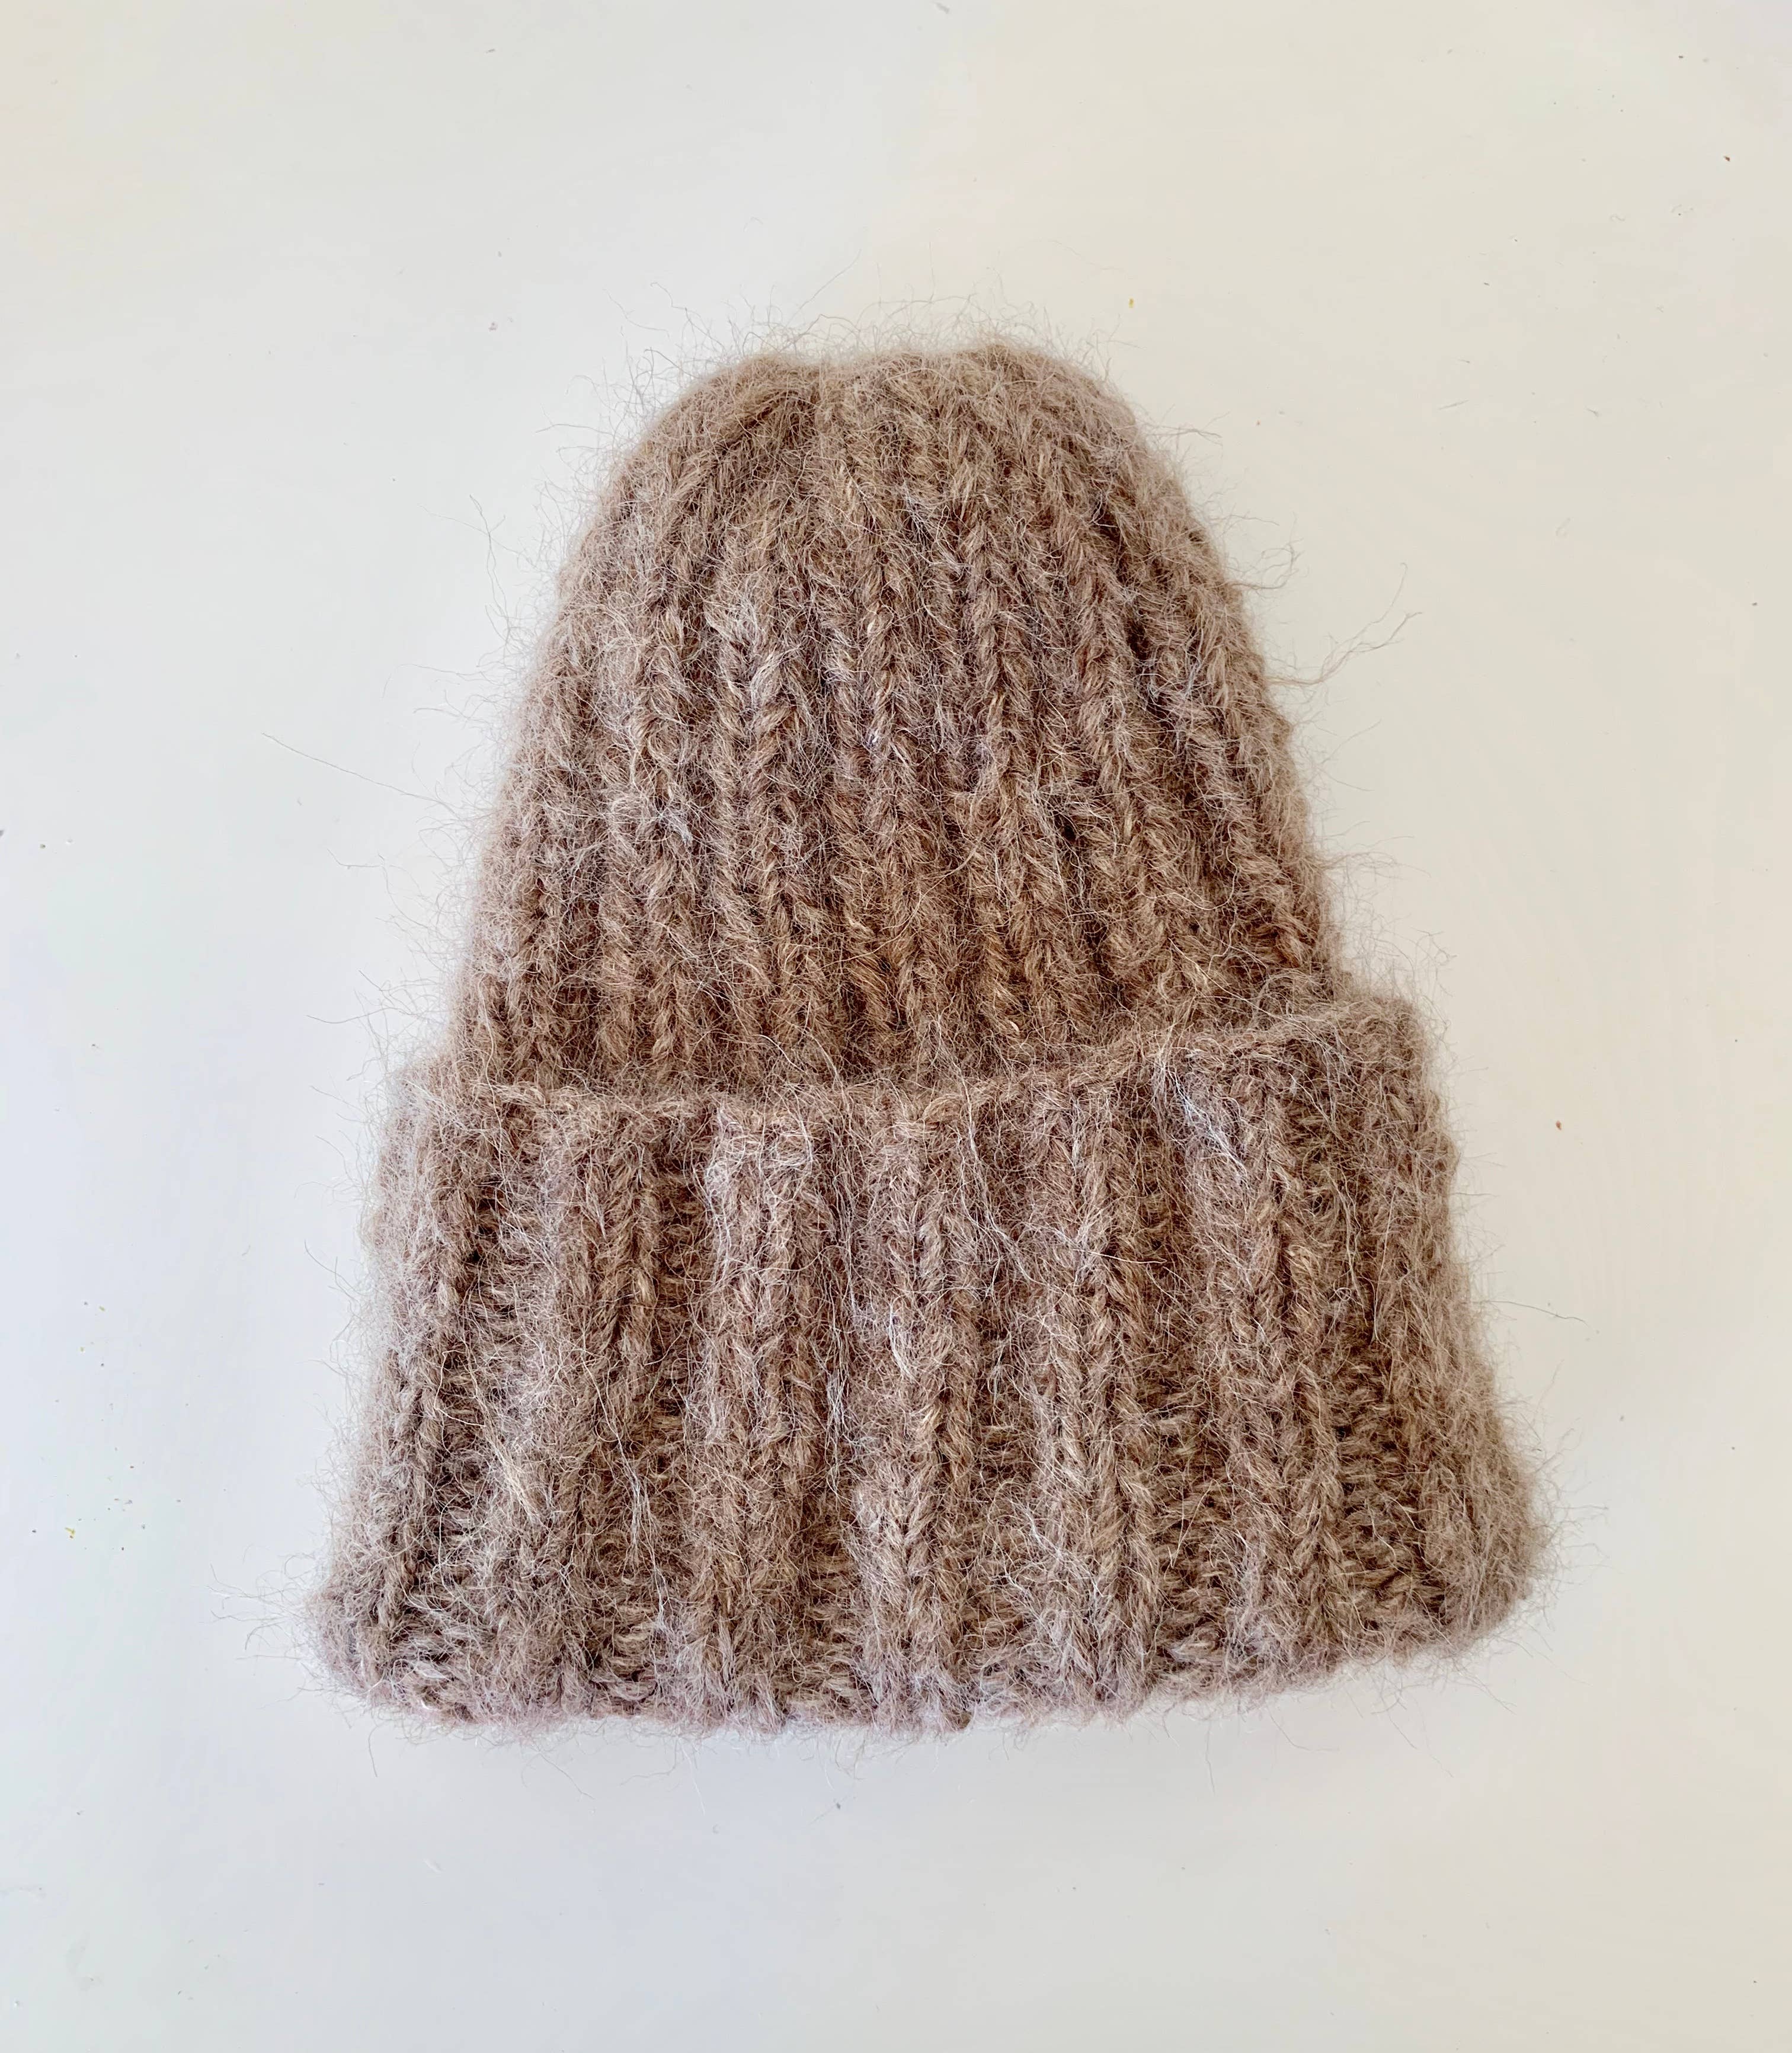 Toque - The “WOOLN” Chunky Hat